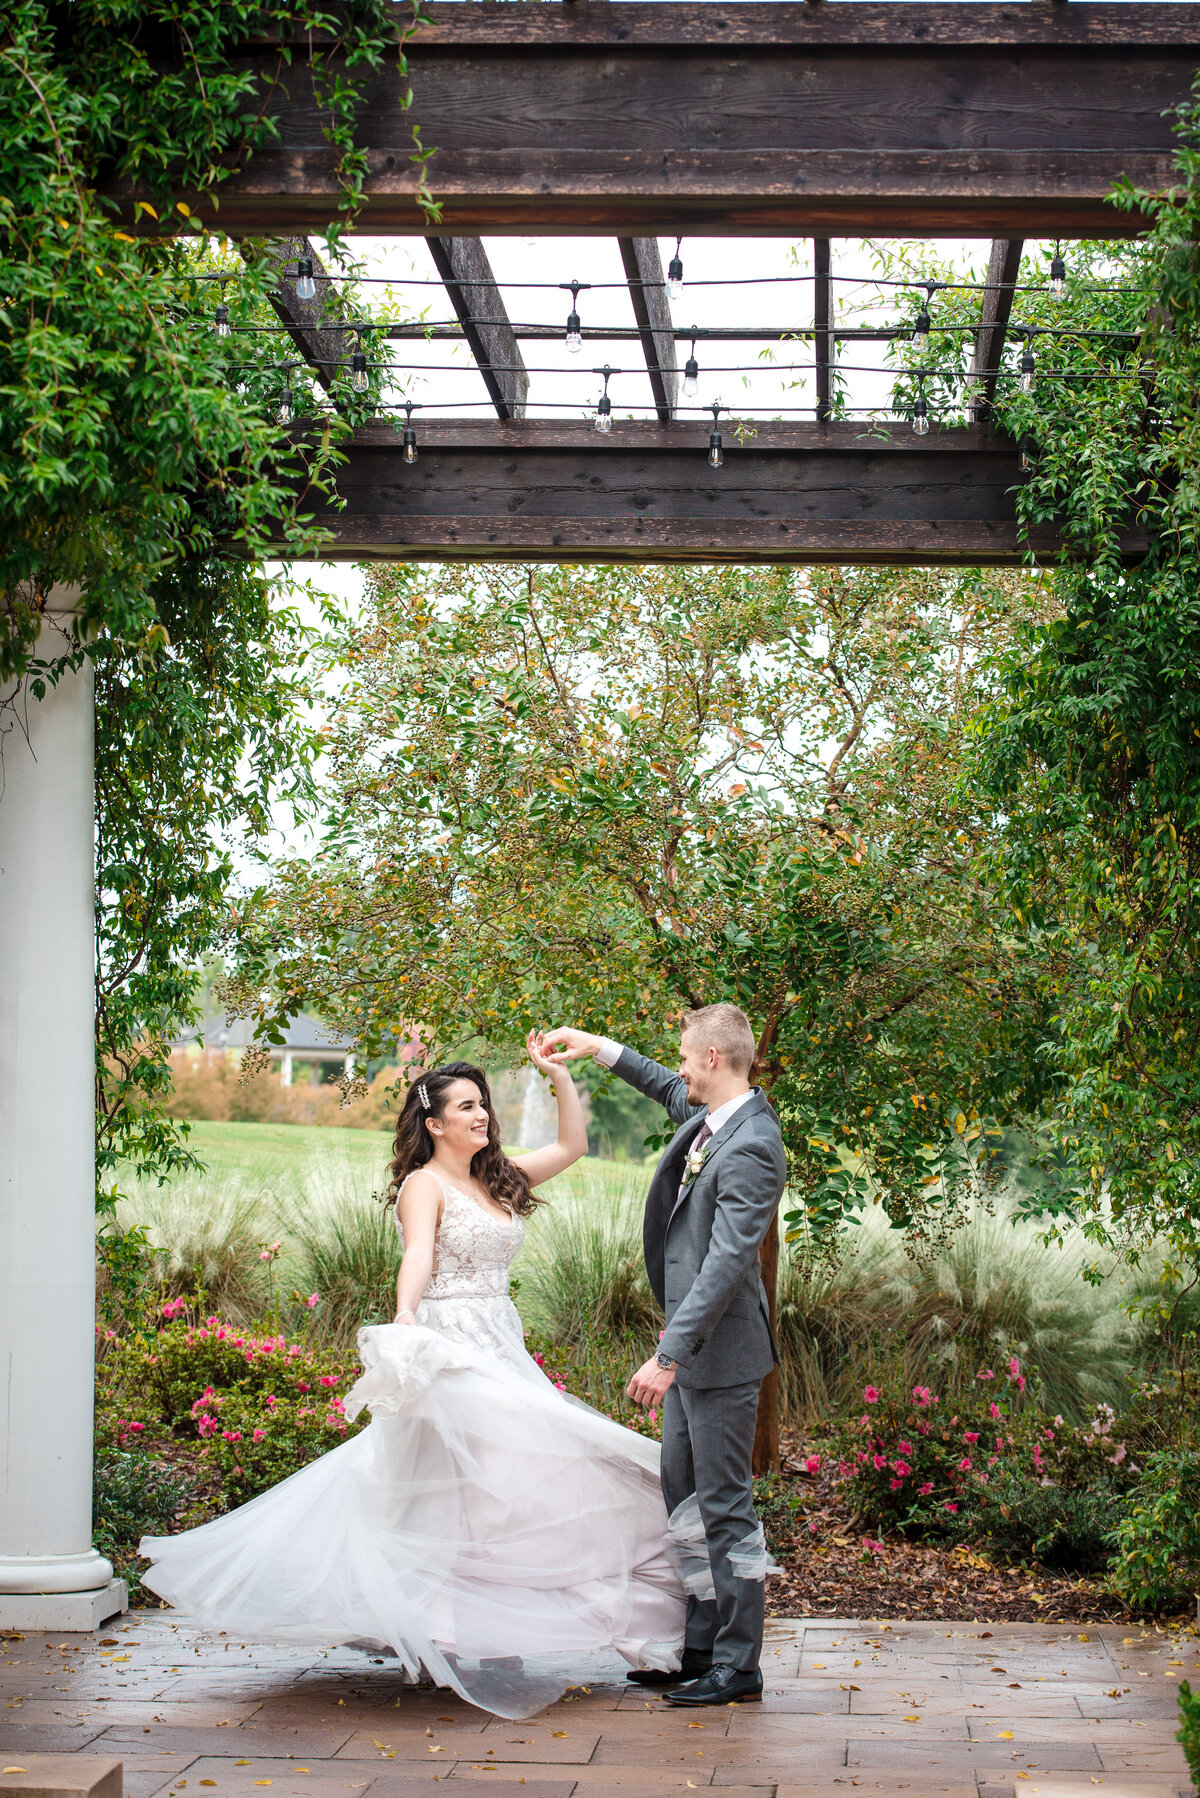 Russian bride and groom dancing outdoors under the pergola at the Ballantyne Hotel by Charlotte wedding photographer DeLong Photography